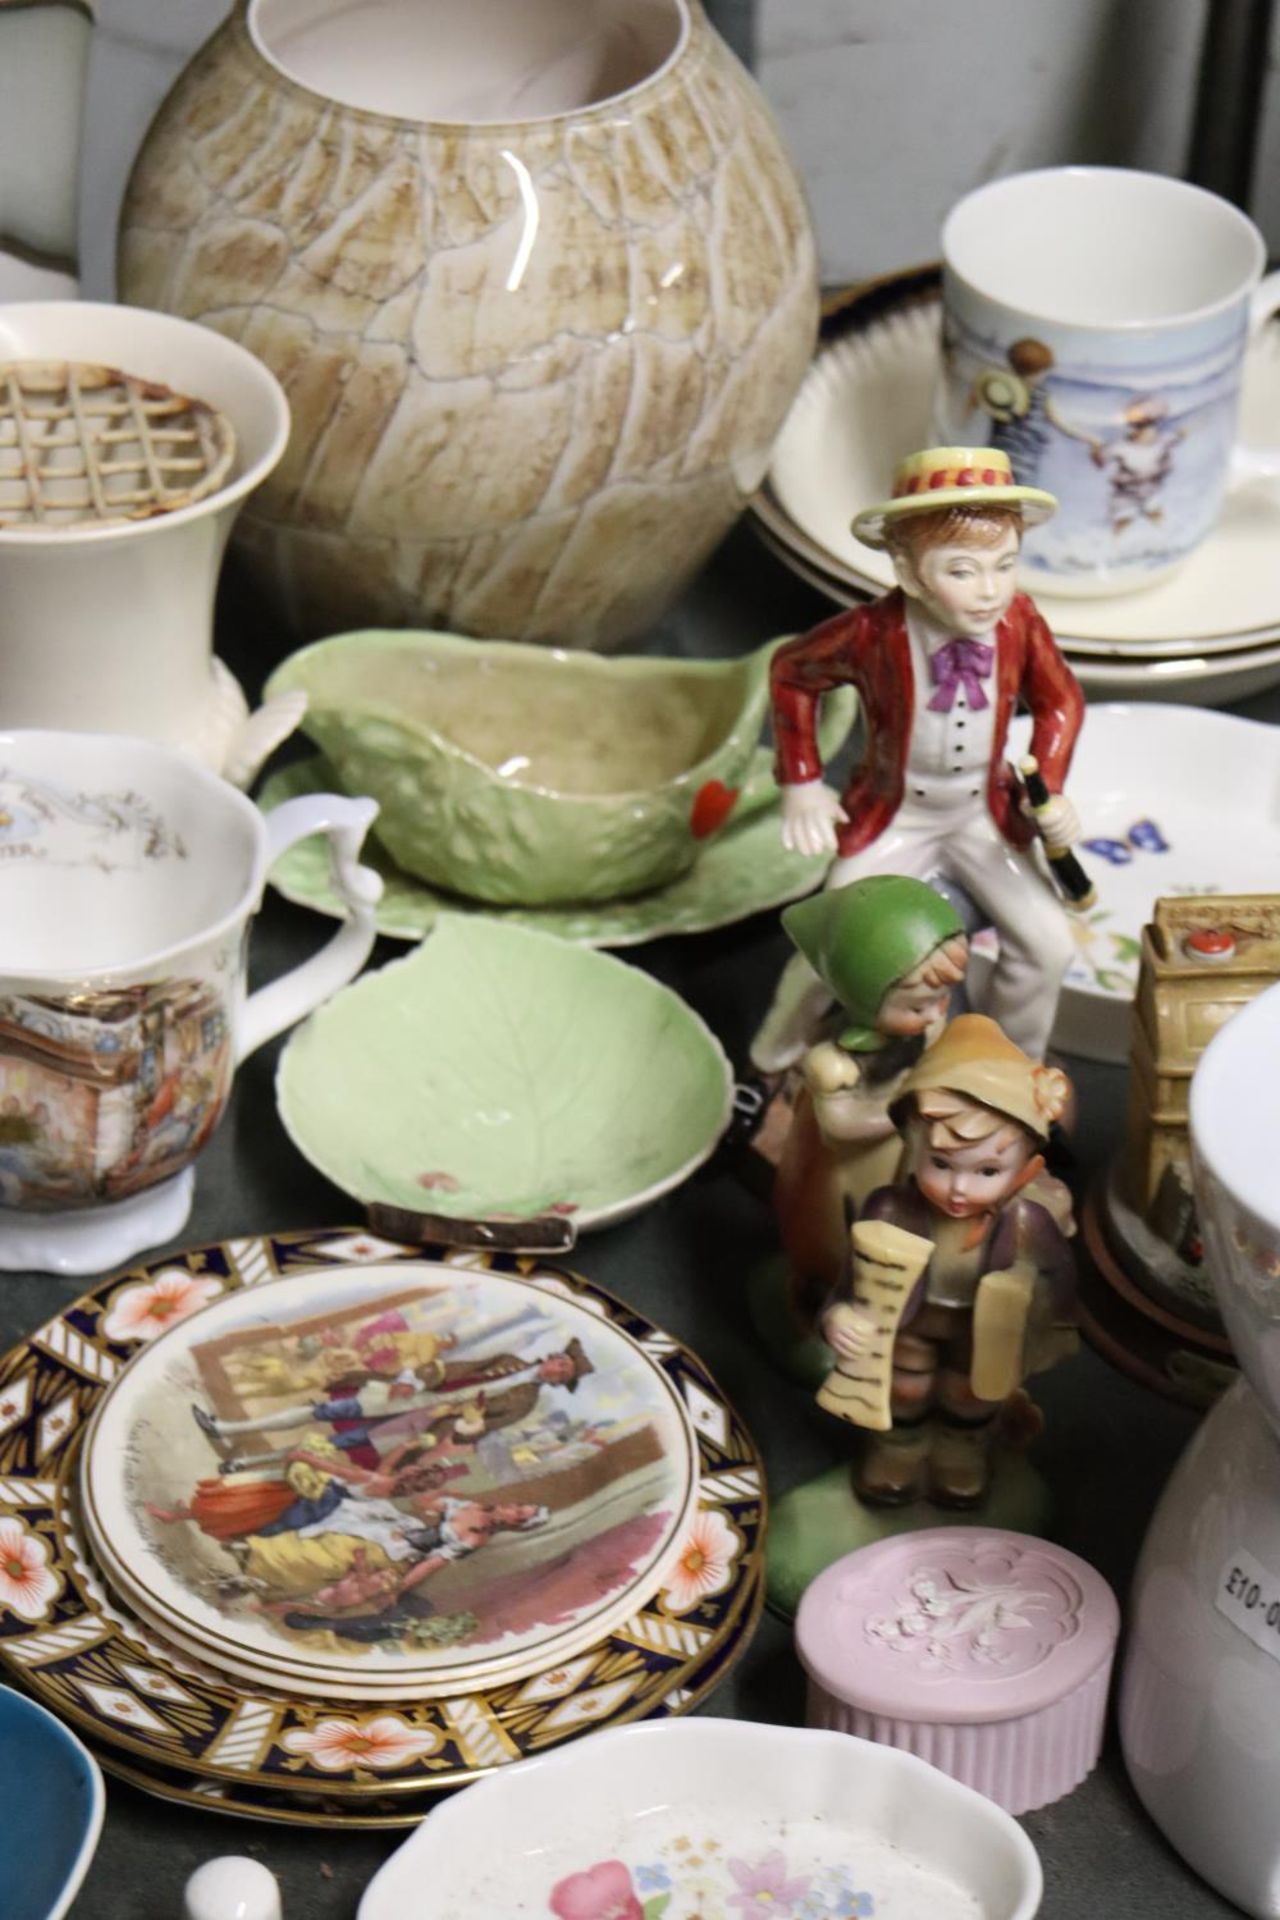 A COLLECTION OF CERAMICS TO INCLUDE FIGURINES, PLATES, VASES ETC - Image 6 of 6